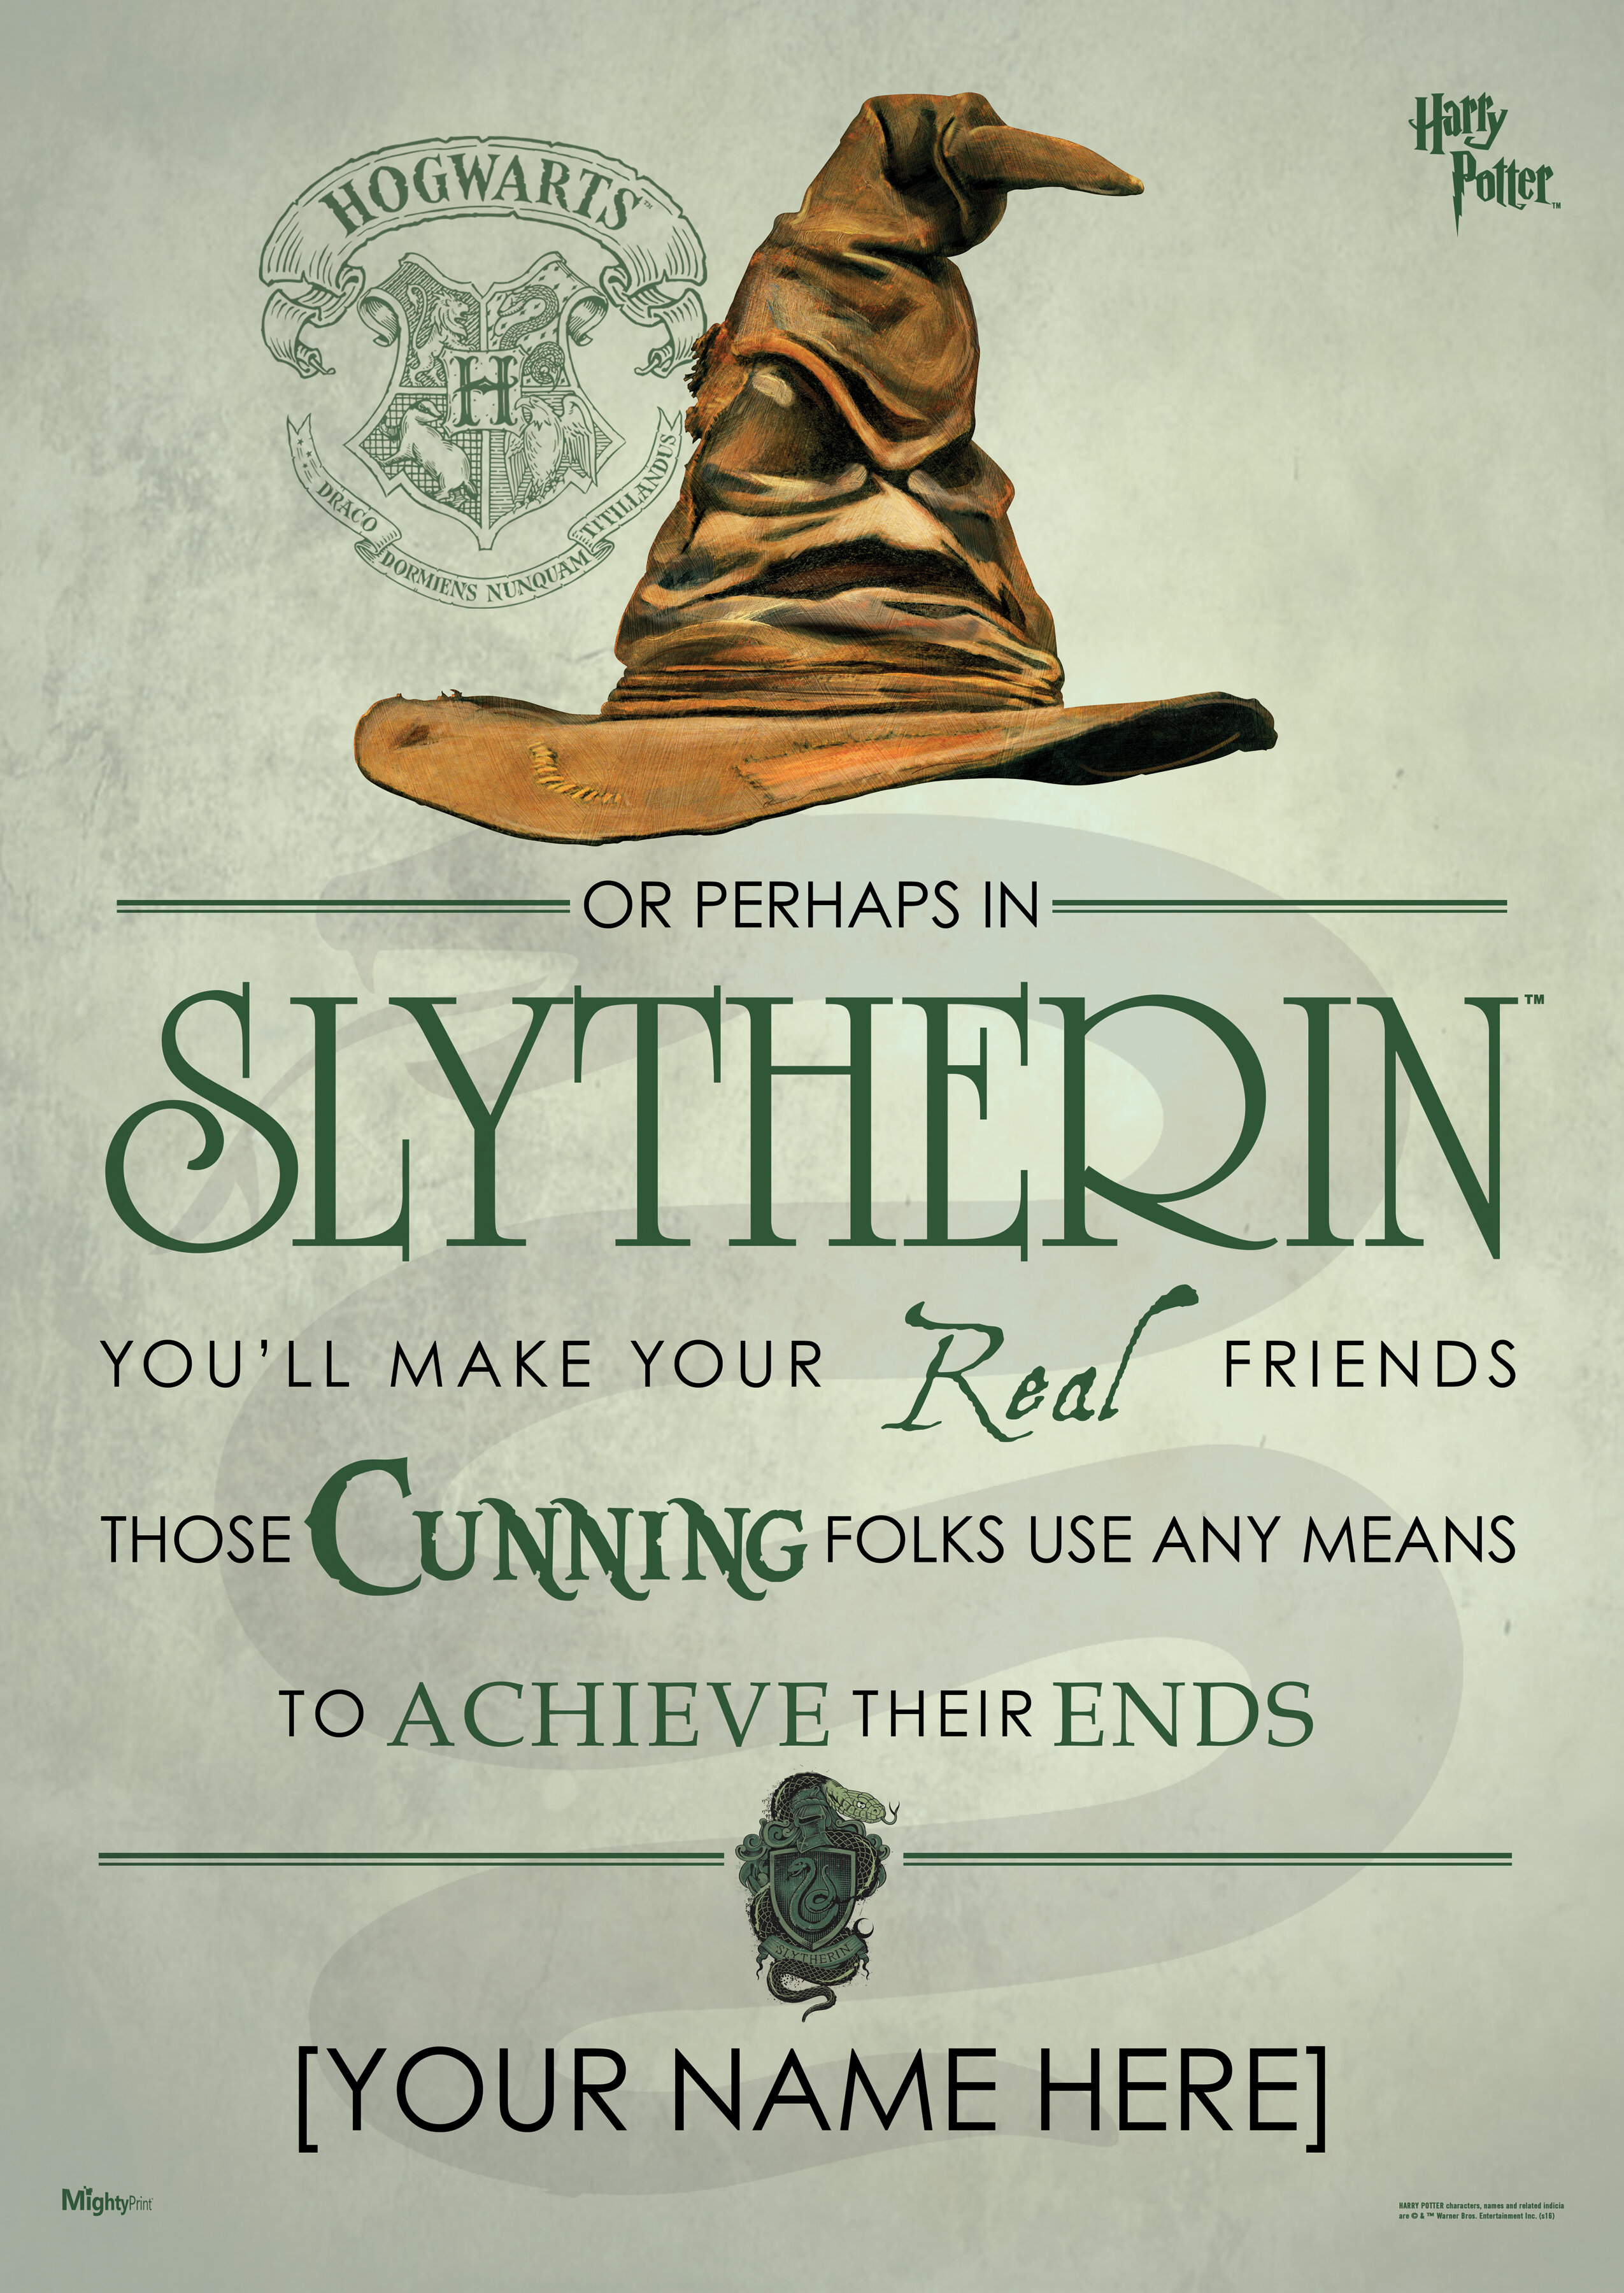 Hogwarts Harry Potter Slytherin - Paint By Number - Paint by